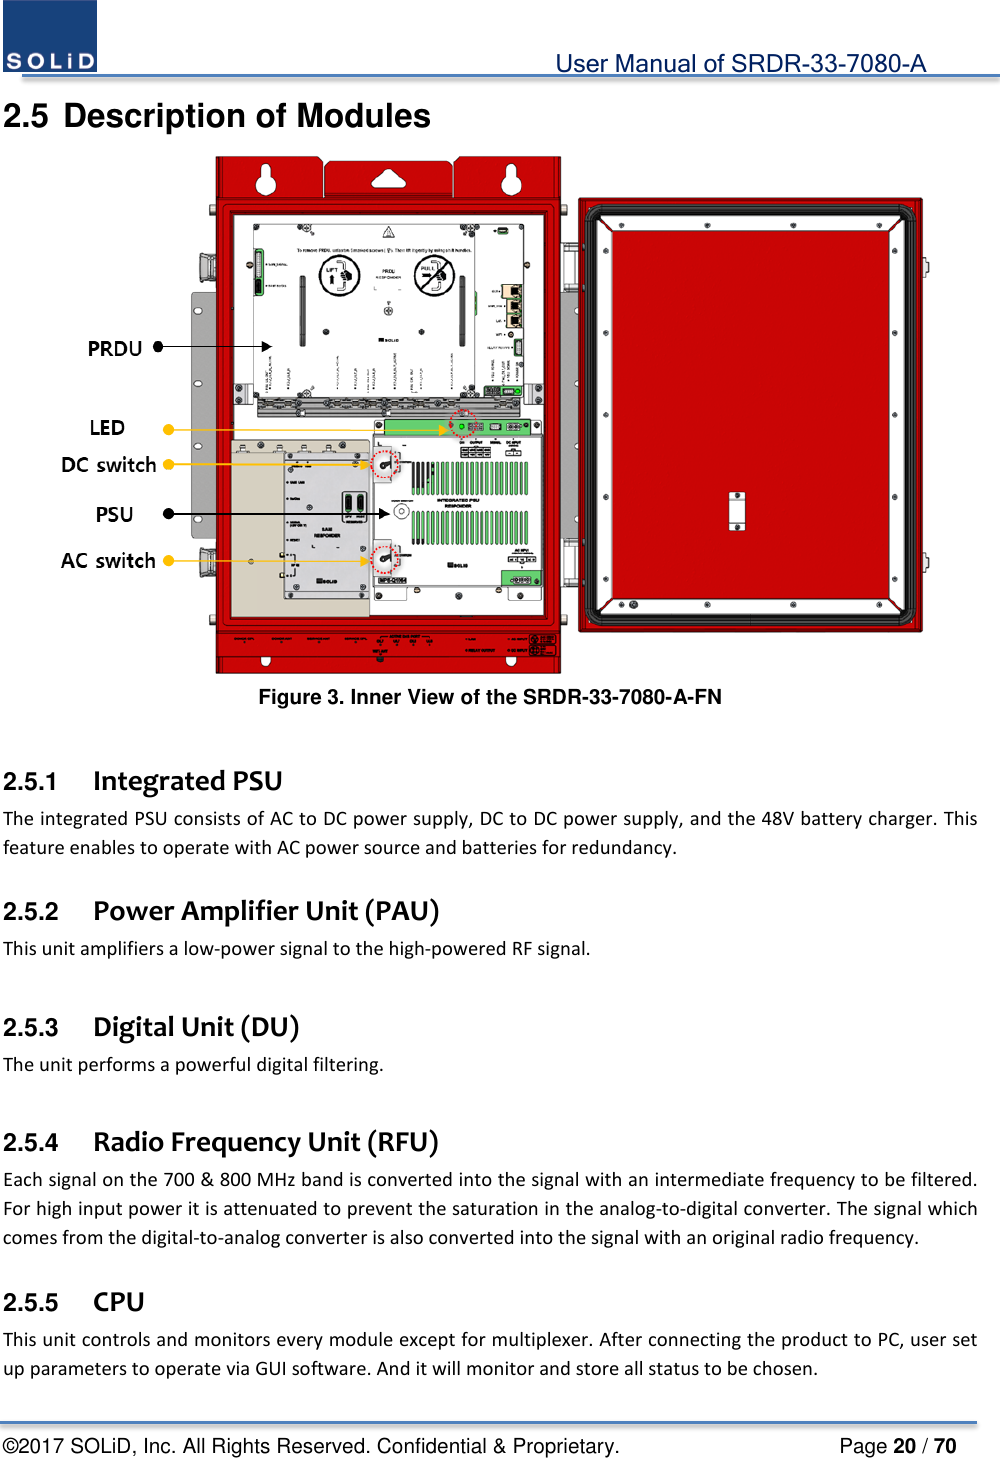                                             User Manual of SRDR-33-7080-A ©2017 SOLiD, Inc. All Rights Reserved. Confidential &amp; Proprietary.                     Page 20 / 70 2.5 Description of Modules  Figure 3. Inner View of the SRDR-33-7080-A-FN  2.5.1  Integrated PSU The integrated PSU consists of AC to DC power supply, DC to DC power supply, and the 48V battery charger. This feature enables to operate with AC power source and batteries for redundancy.    2.5.2  Power Amplifier Unit (PAU) This unit amplifiers a low-power signal to the high-powered RF signal.  2.5.3  Digital Unit (DU) The unit performs a powerful digital filtering.    2.5.4  Radio Frequency Unit (RFU) Each signal on the 700 &amp; 800 MHz band is converted into the signal with an intermediate frequency to be filtered. For high input power it is attenuated to prevent the saturation in the analog-to-digital converter. The signal which comes from the digital-to-analog converter is also converted into the signal with an original radio frequency.    2.5.5   CPU This unit controls and monitors every module except for multiplexer. After connecting the product to PC, user set up parameters to operate via GUI software. And it will monitor and store all status to be chosen.  